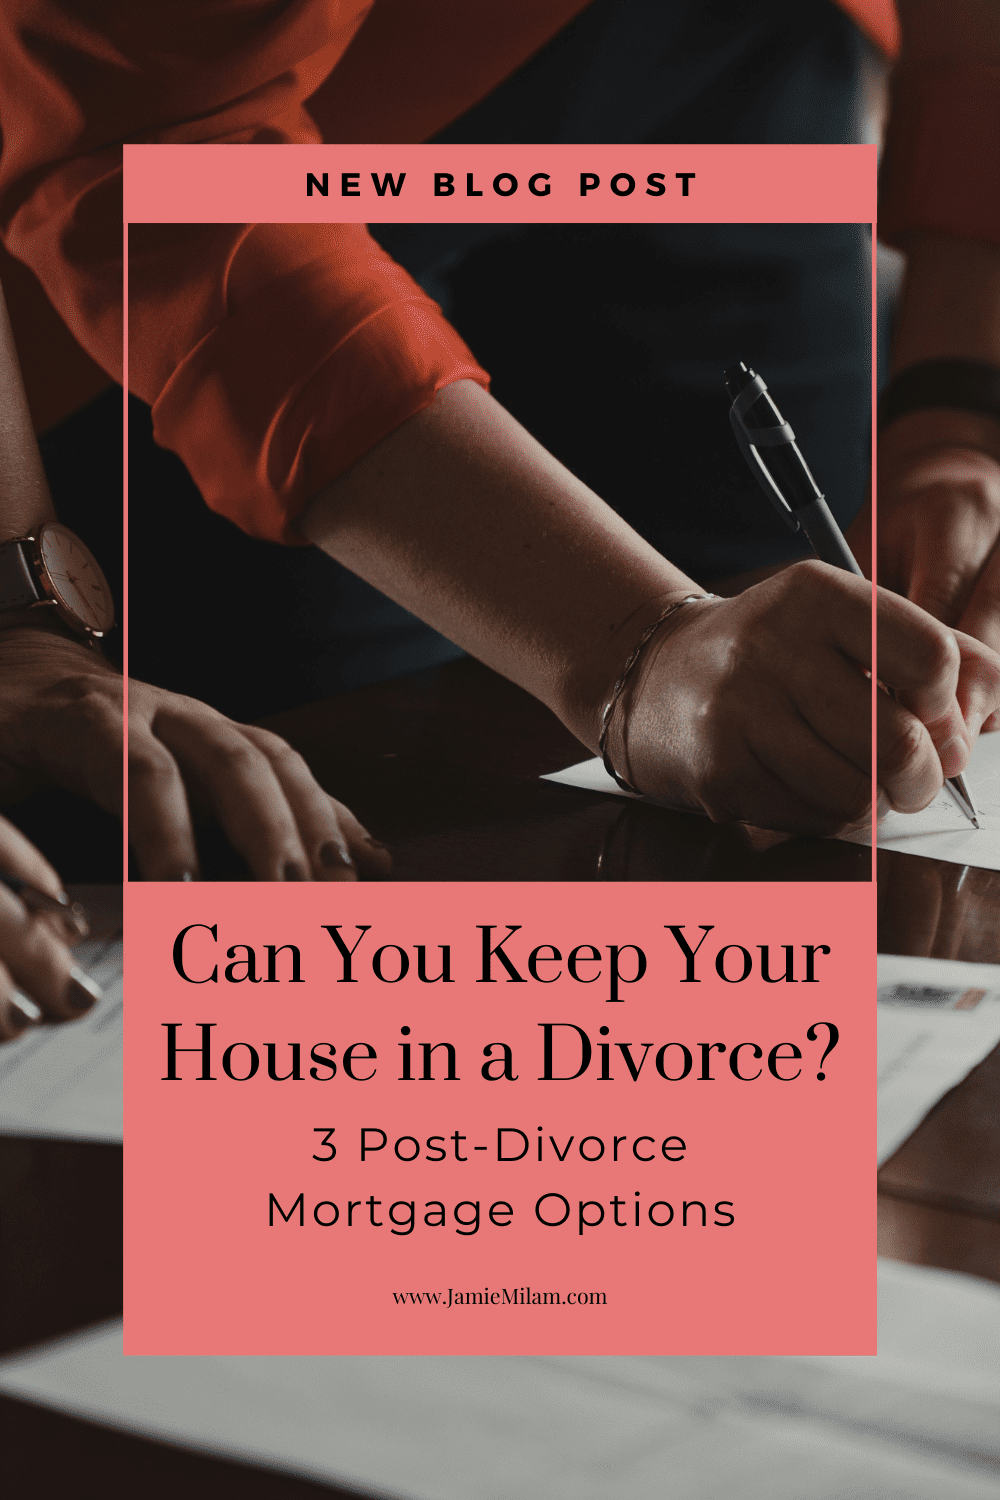 Image of woman signing paperwork with the text "Can You Keep Your Home in a Divorce? 3 Post-Divorce Mortgage Options"